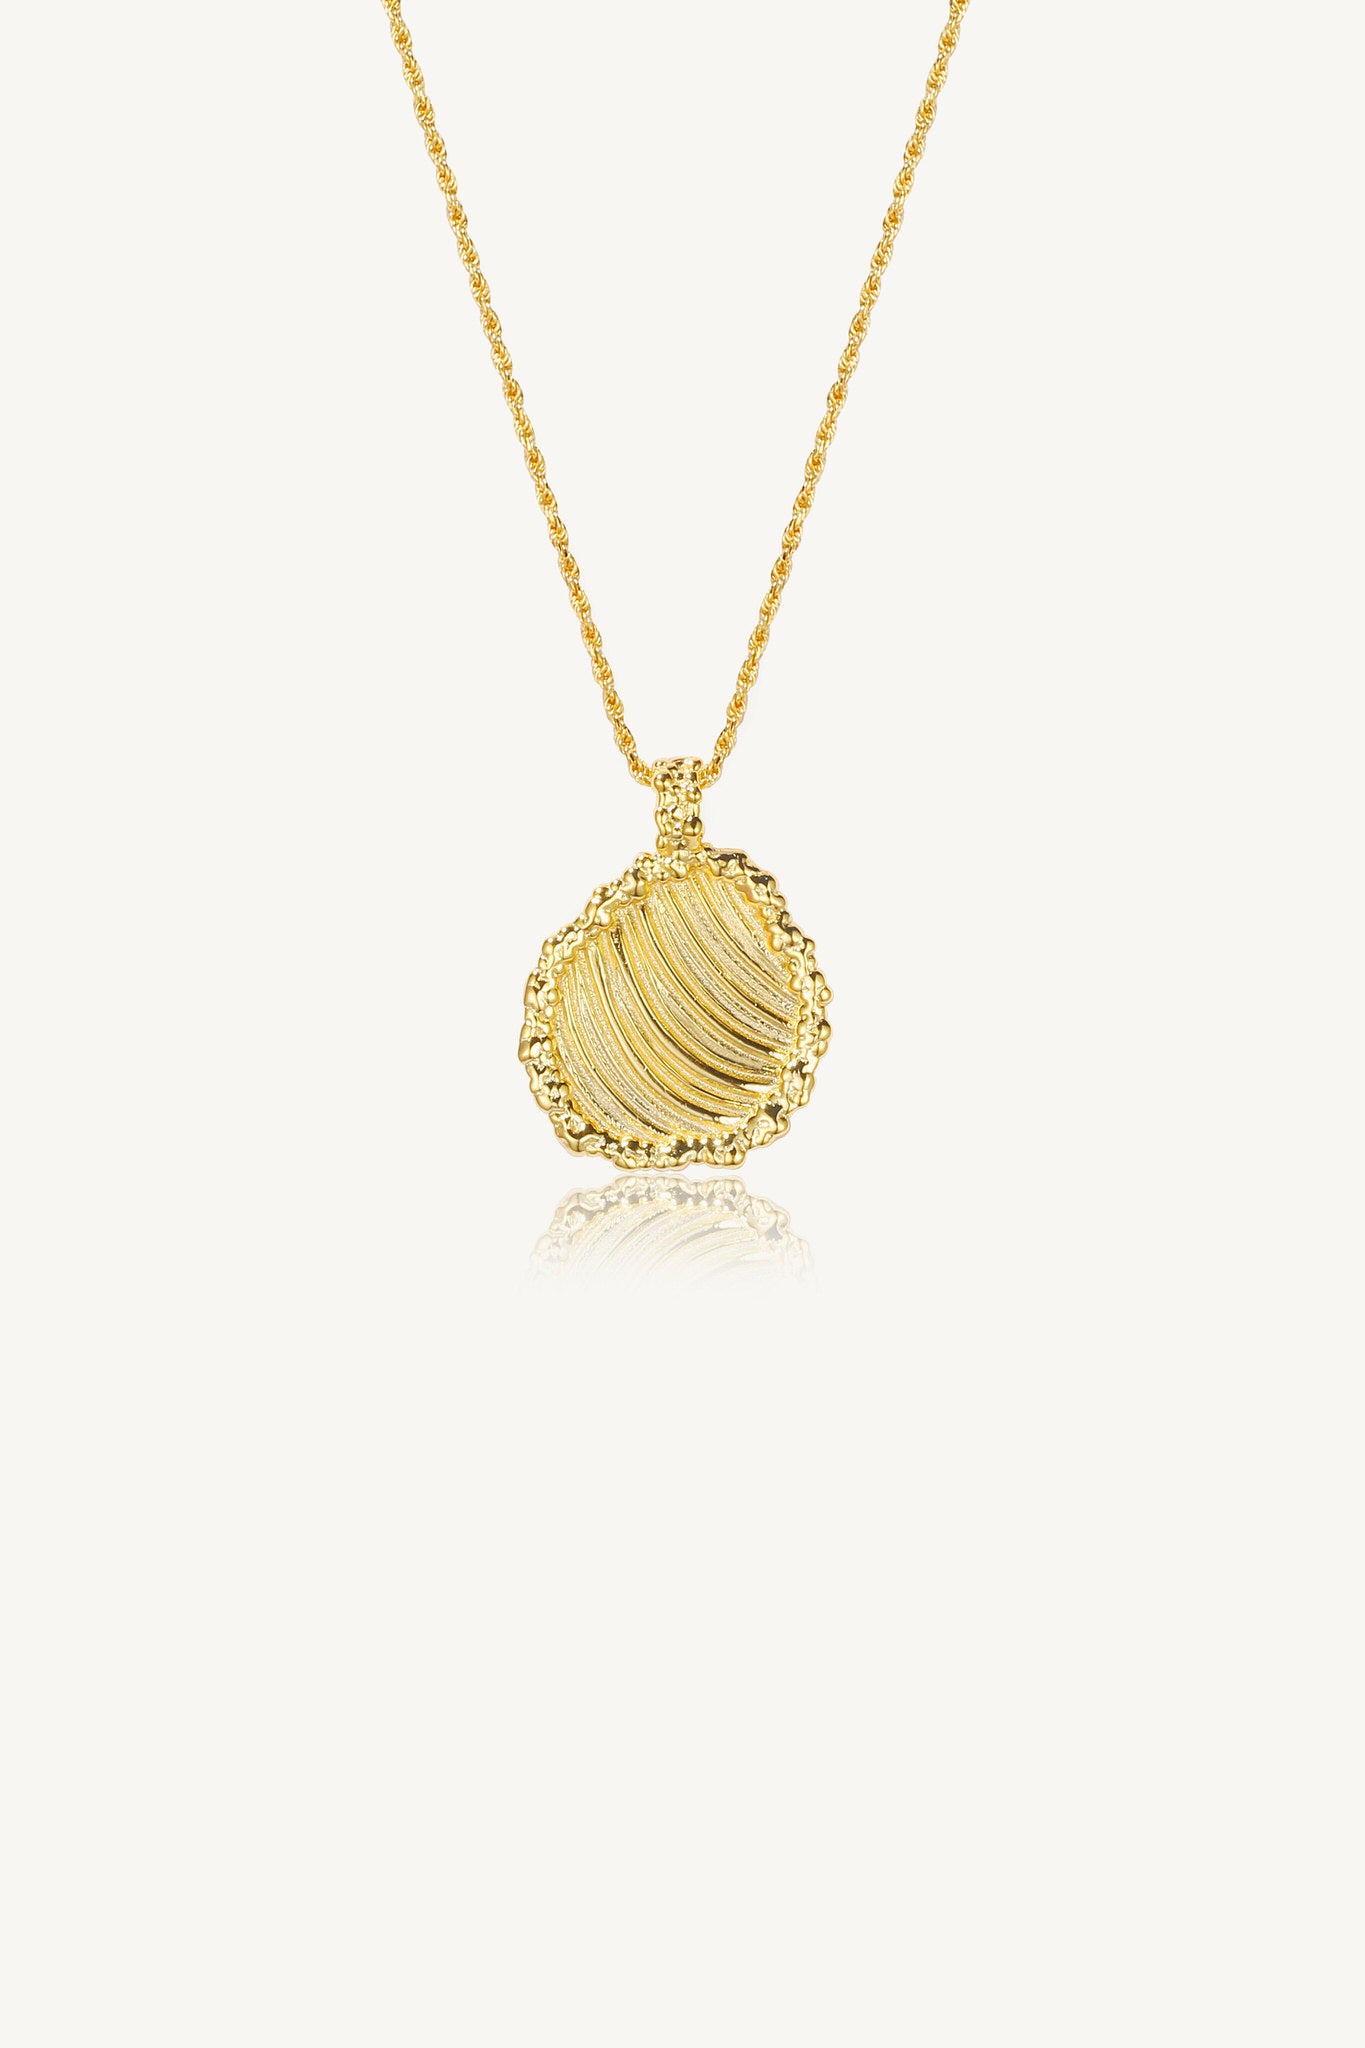 Engraved Shell Lines Pendant Necklace Gold Vermeil - AVILIO SILVER JEWELLERY 